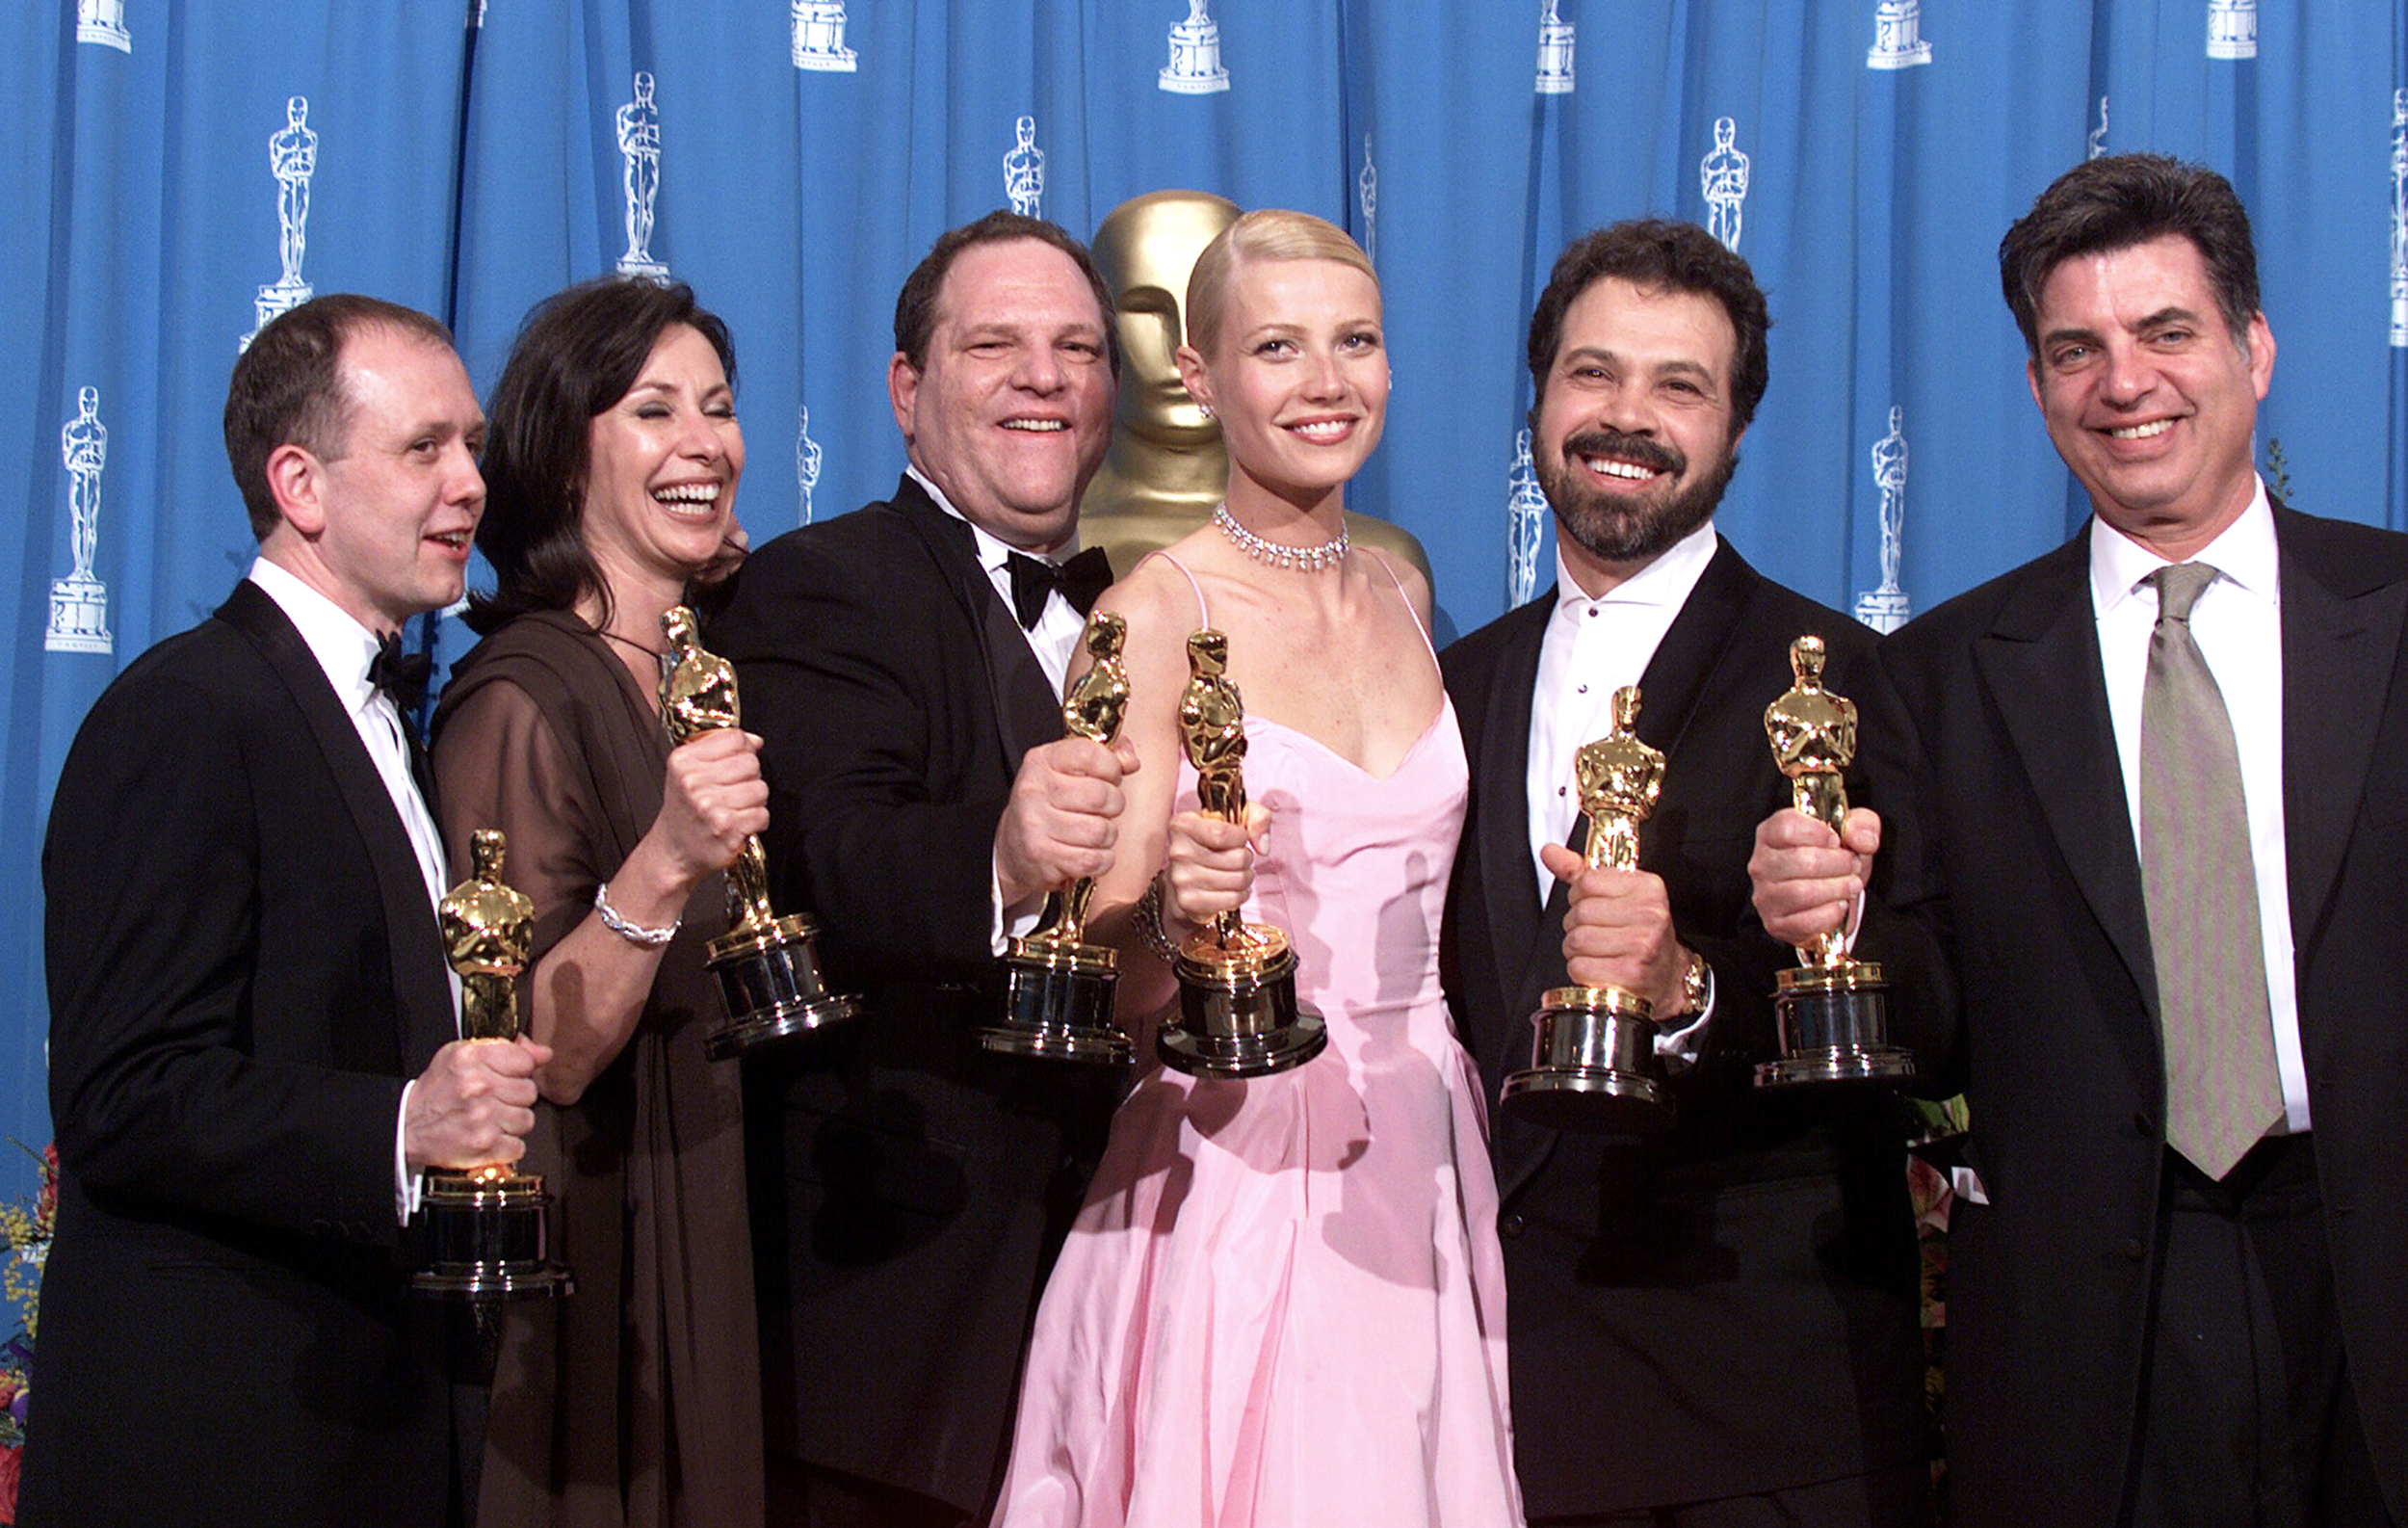 PHOTO: "Shakespeare in Love' Best Actress winner Gwyneth Paltrow (center) is joined by Harvey Weinstein (center left)  and other stars as they celebrated their win of Best Picture at the 1999 Academy Awards in Hollywood, Calif., March 21, 1999.